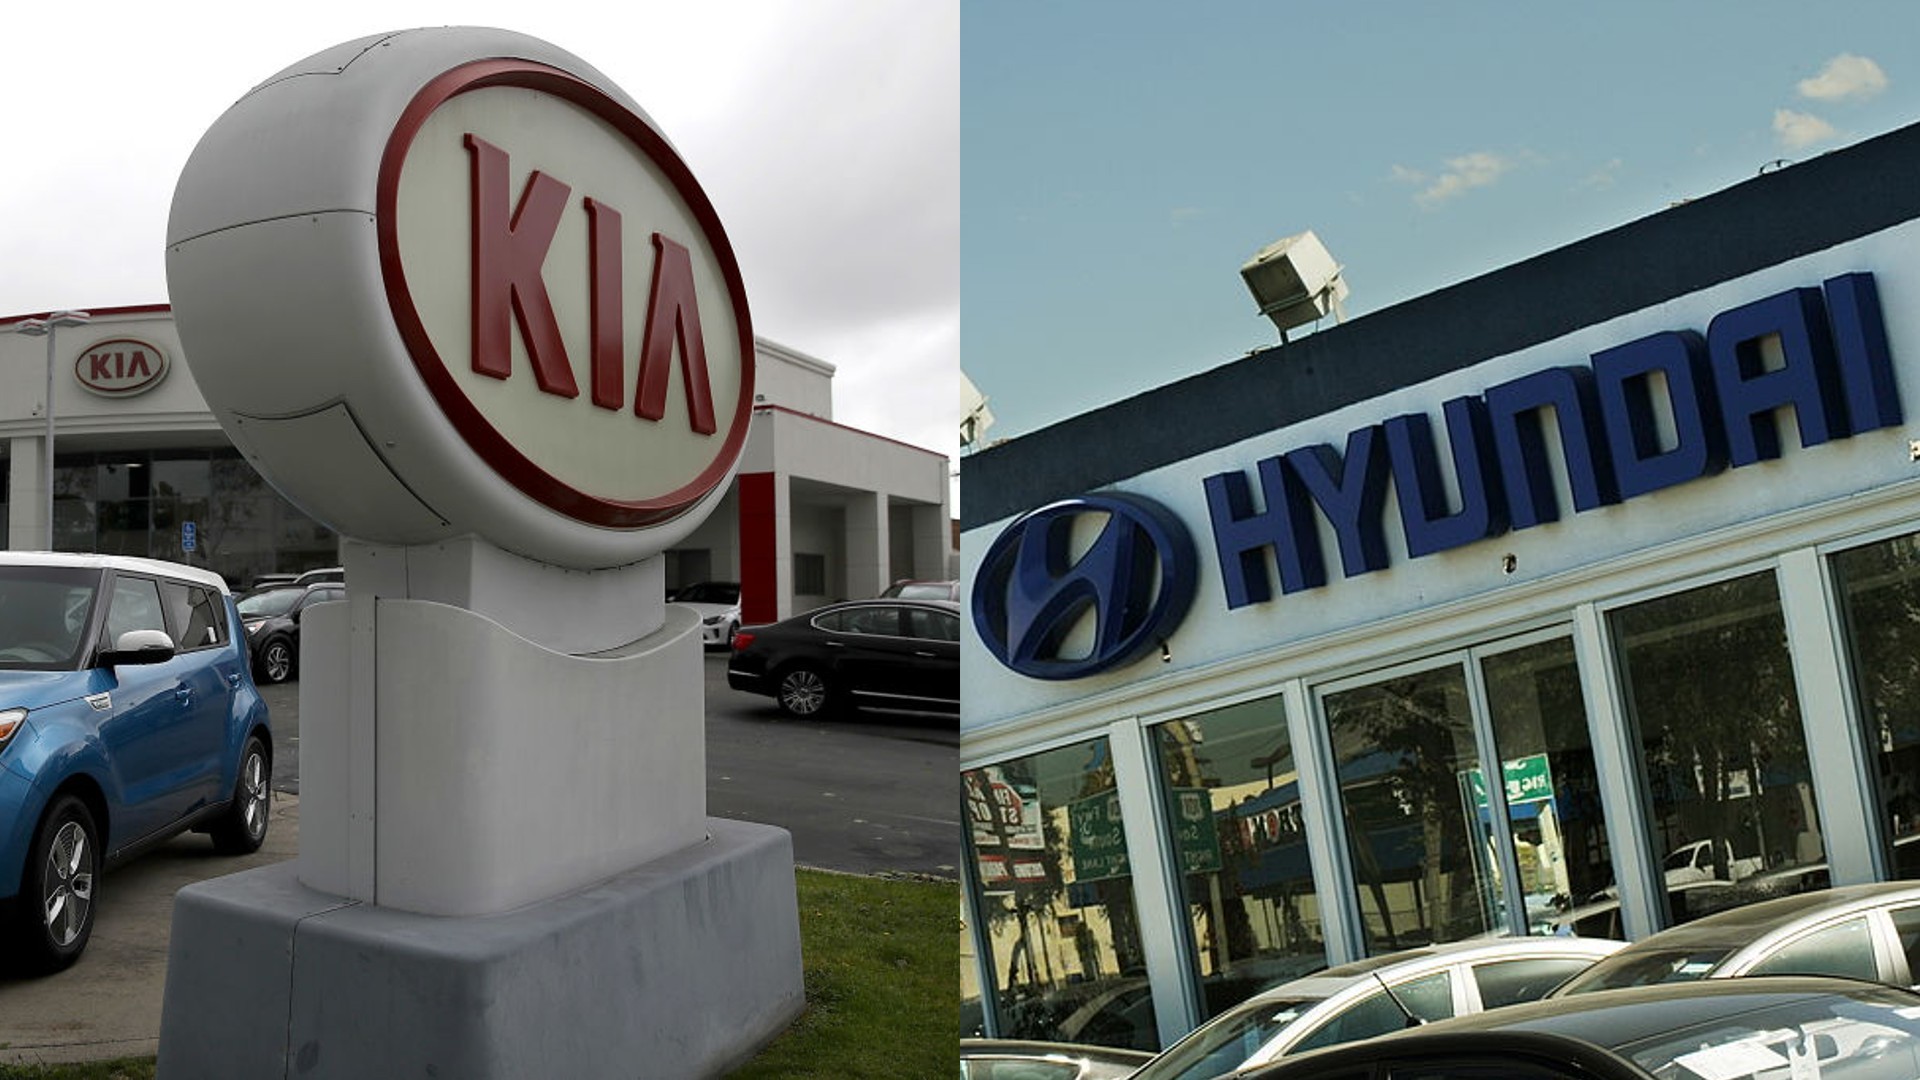 Kia and Hyundai dealerships are seen in this combination of photos from Getty Images.